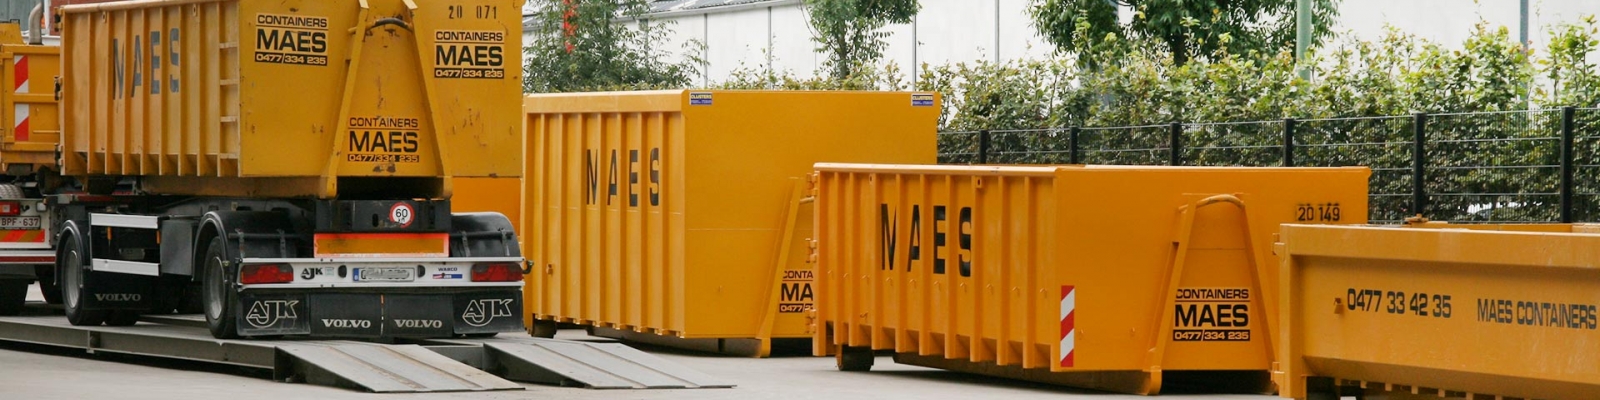 Containers Maes2